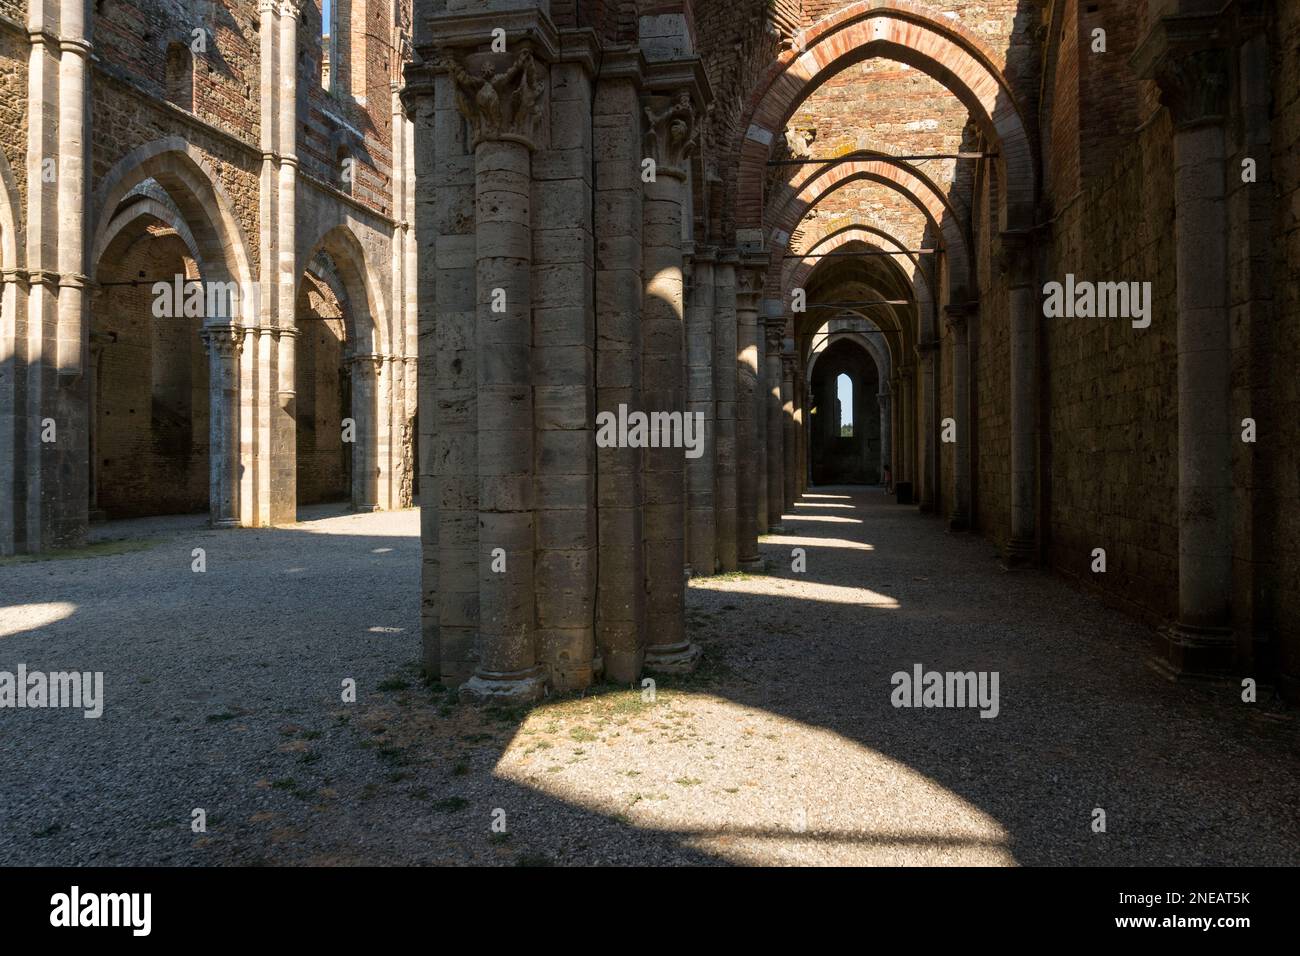 San Galgano ,Italy-august 8,2020:view of the interior of the abbey and former monastery of San Galgano famous for being roofless during a sunny day in Stock Photo